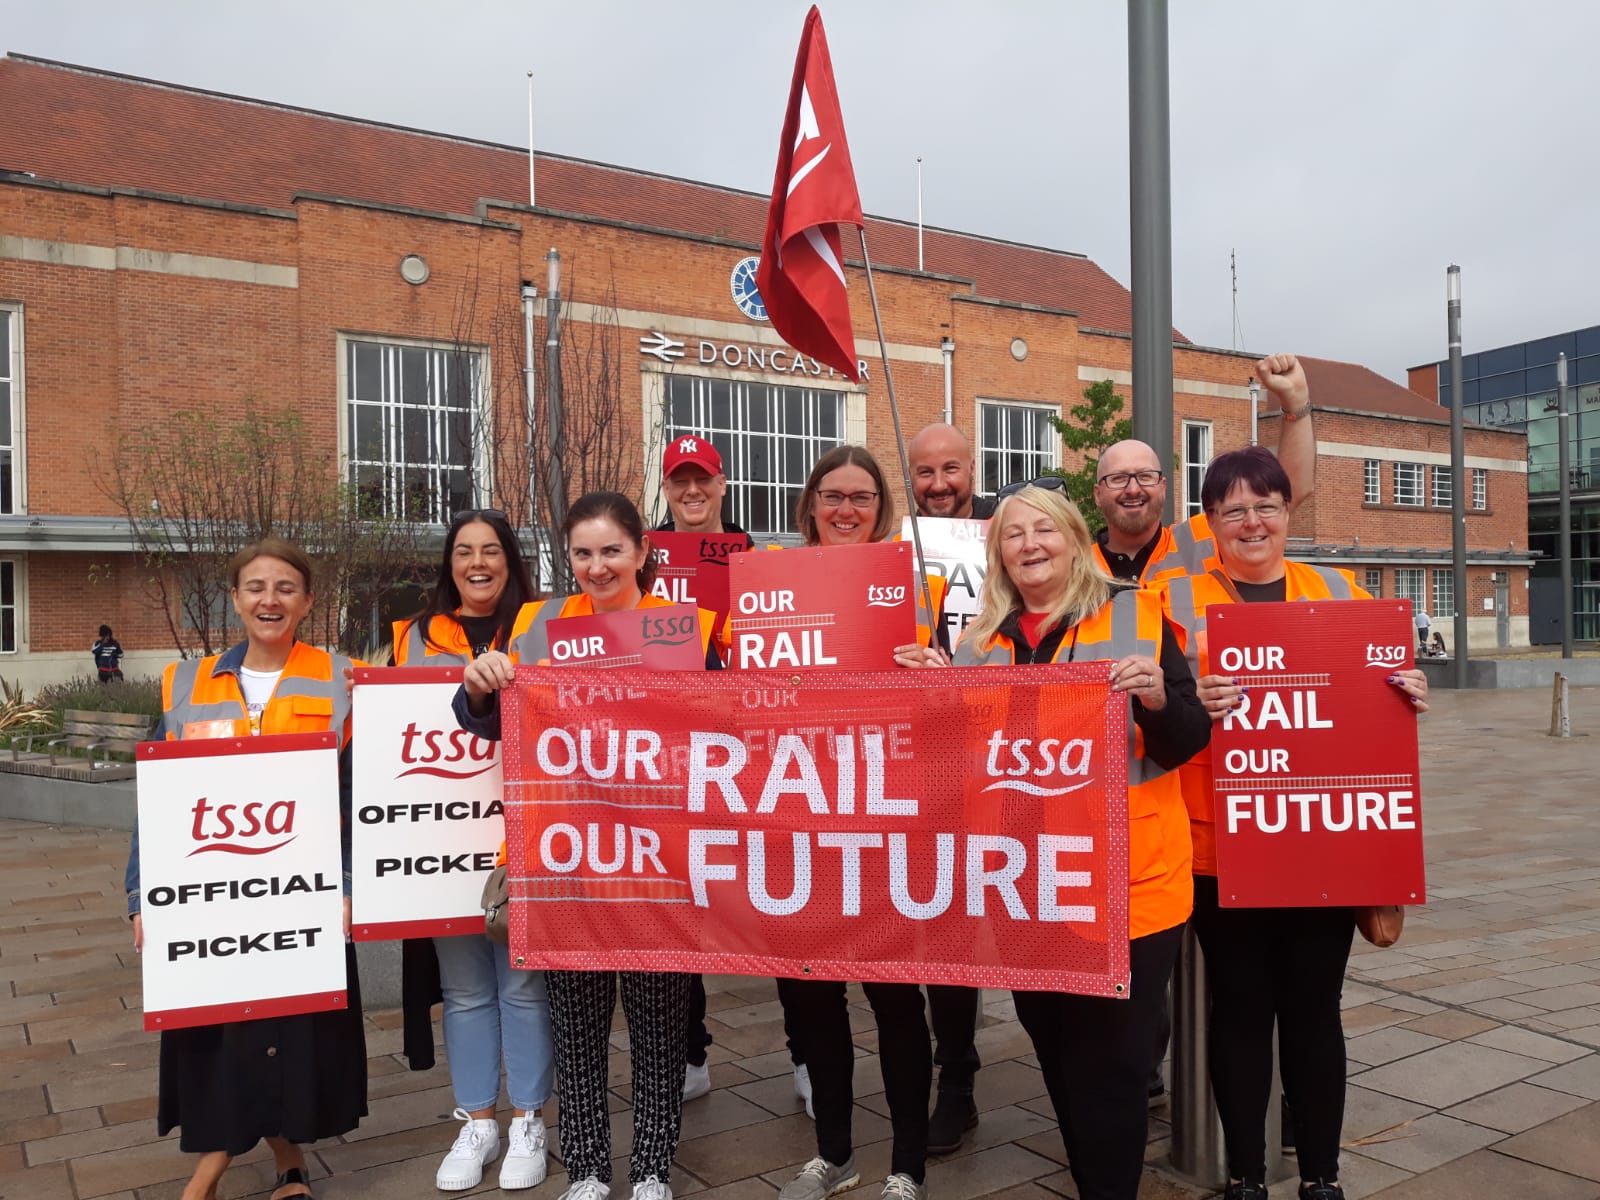 Image shows picket line with TSSA's Andi Fox and eight other TSSA members wearing hi-vis jackets on strike in Doncaster